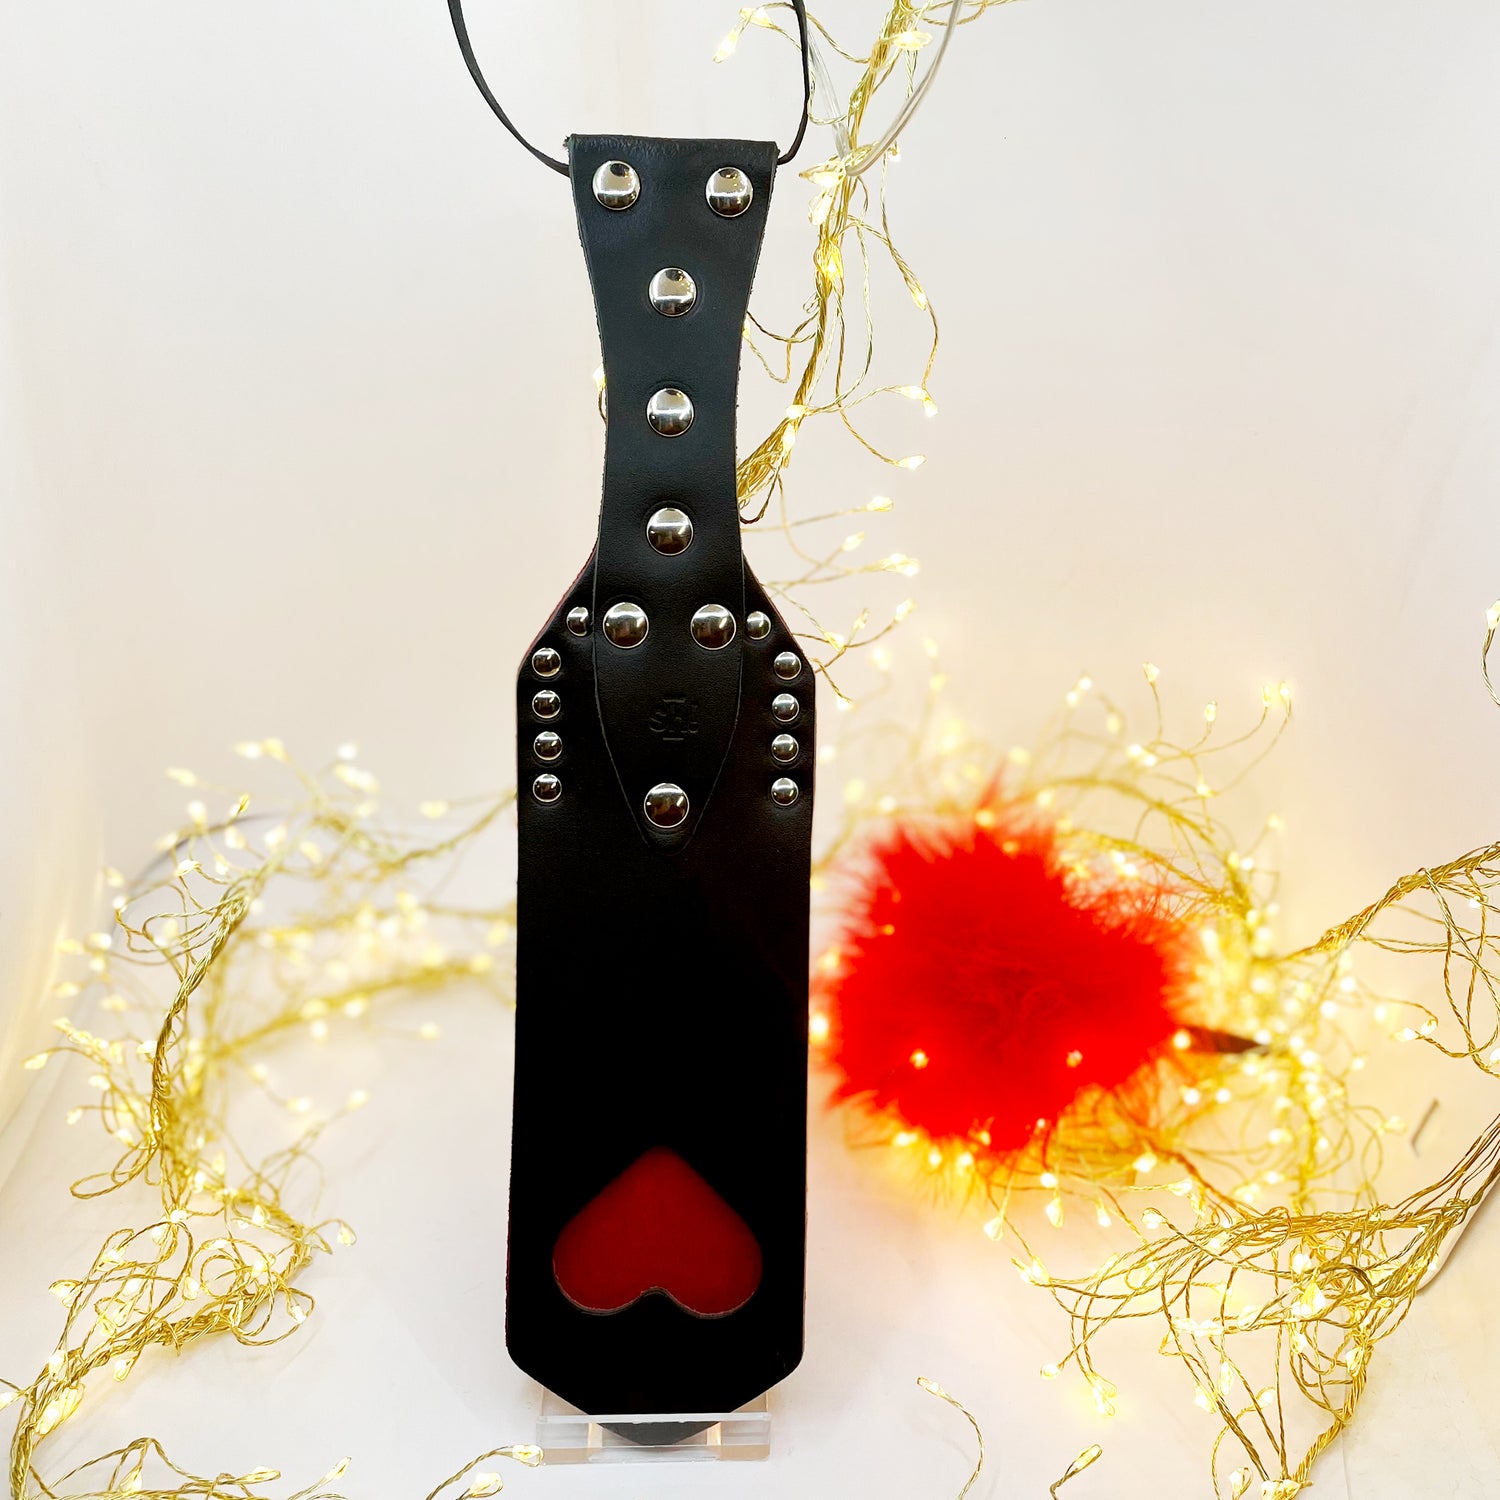 Spanking Paddle with red heart cut-out and red feather tickler